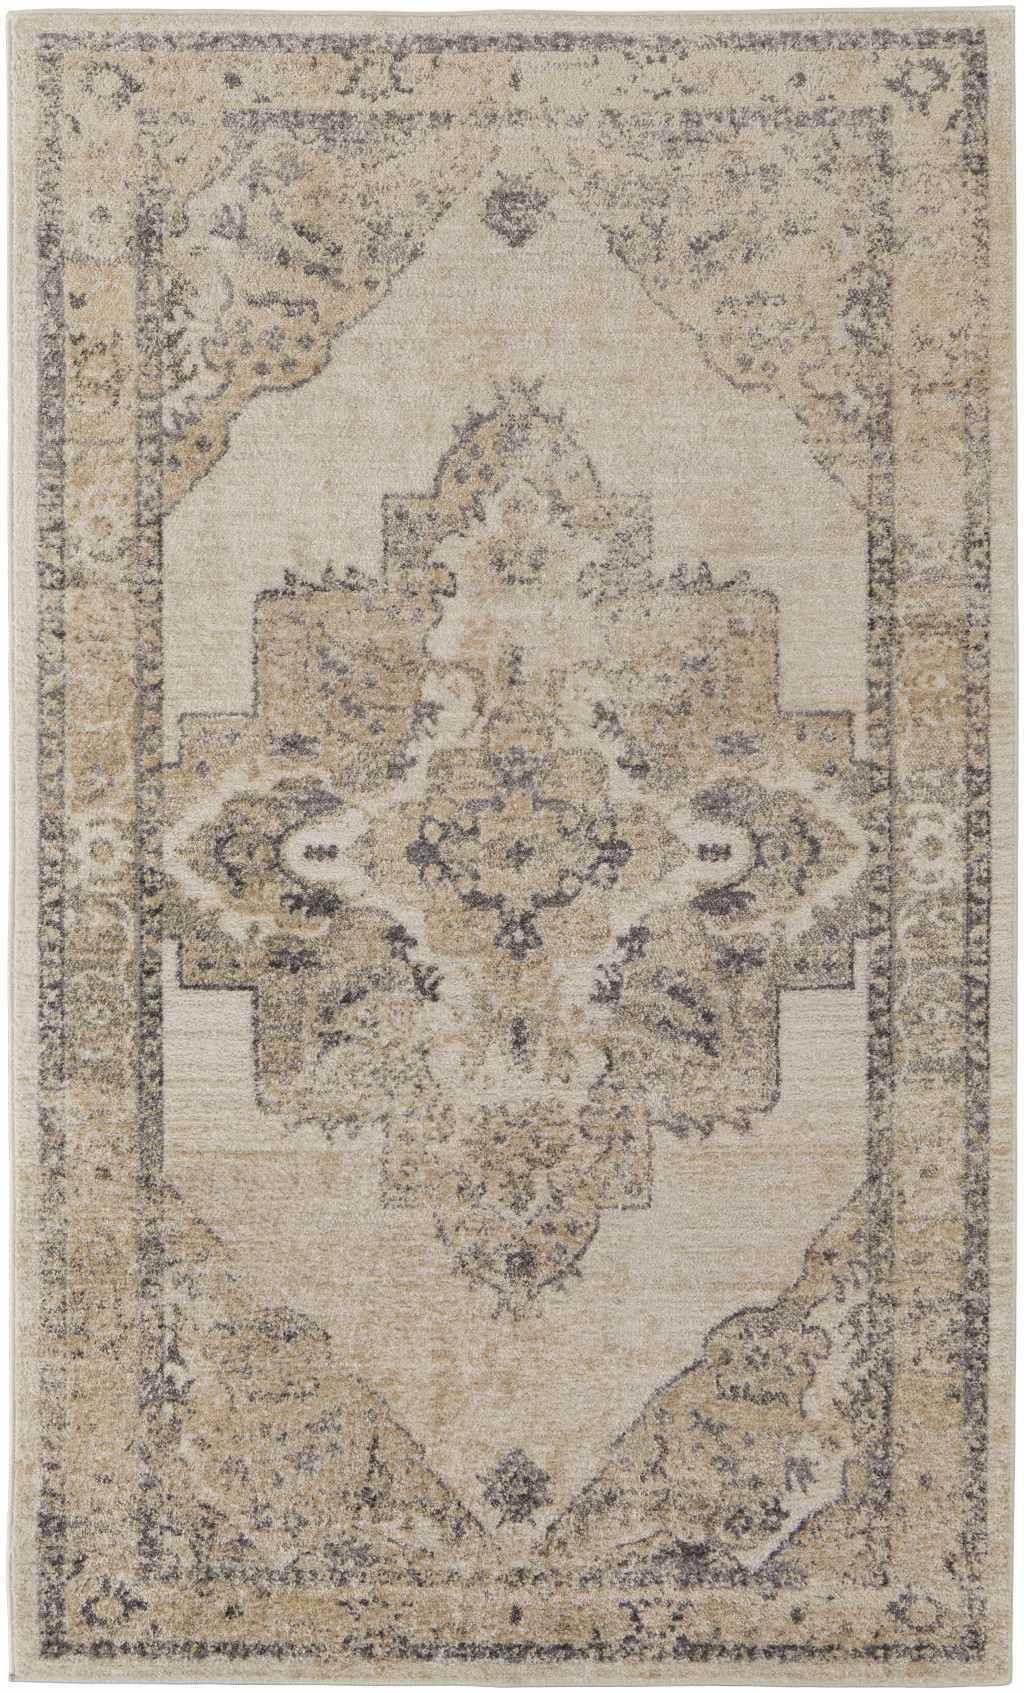 8' X 10' Ivory And Gray Floral Power Loom Distressed Area Rug-513327-1